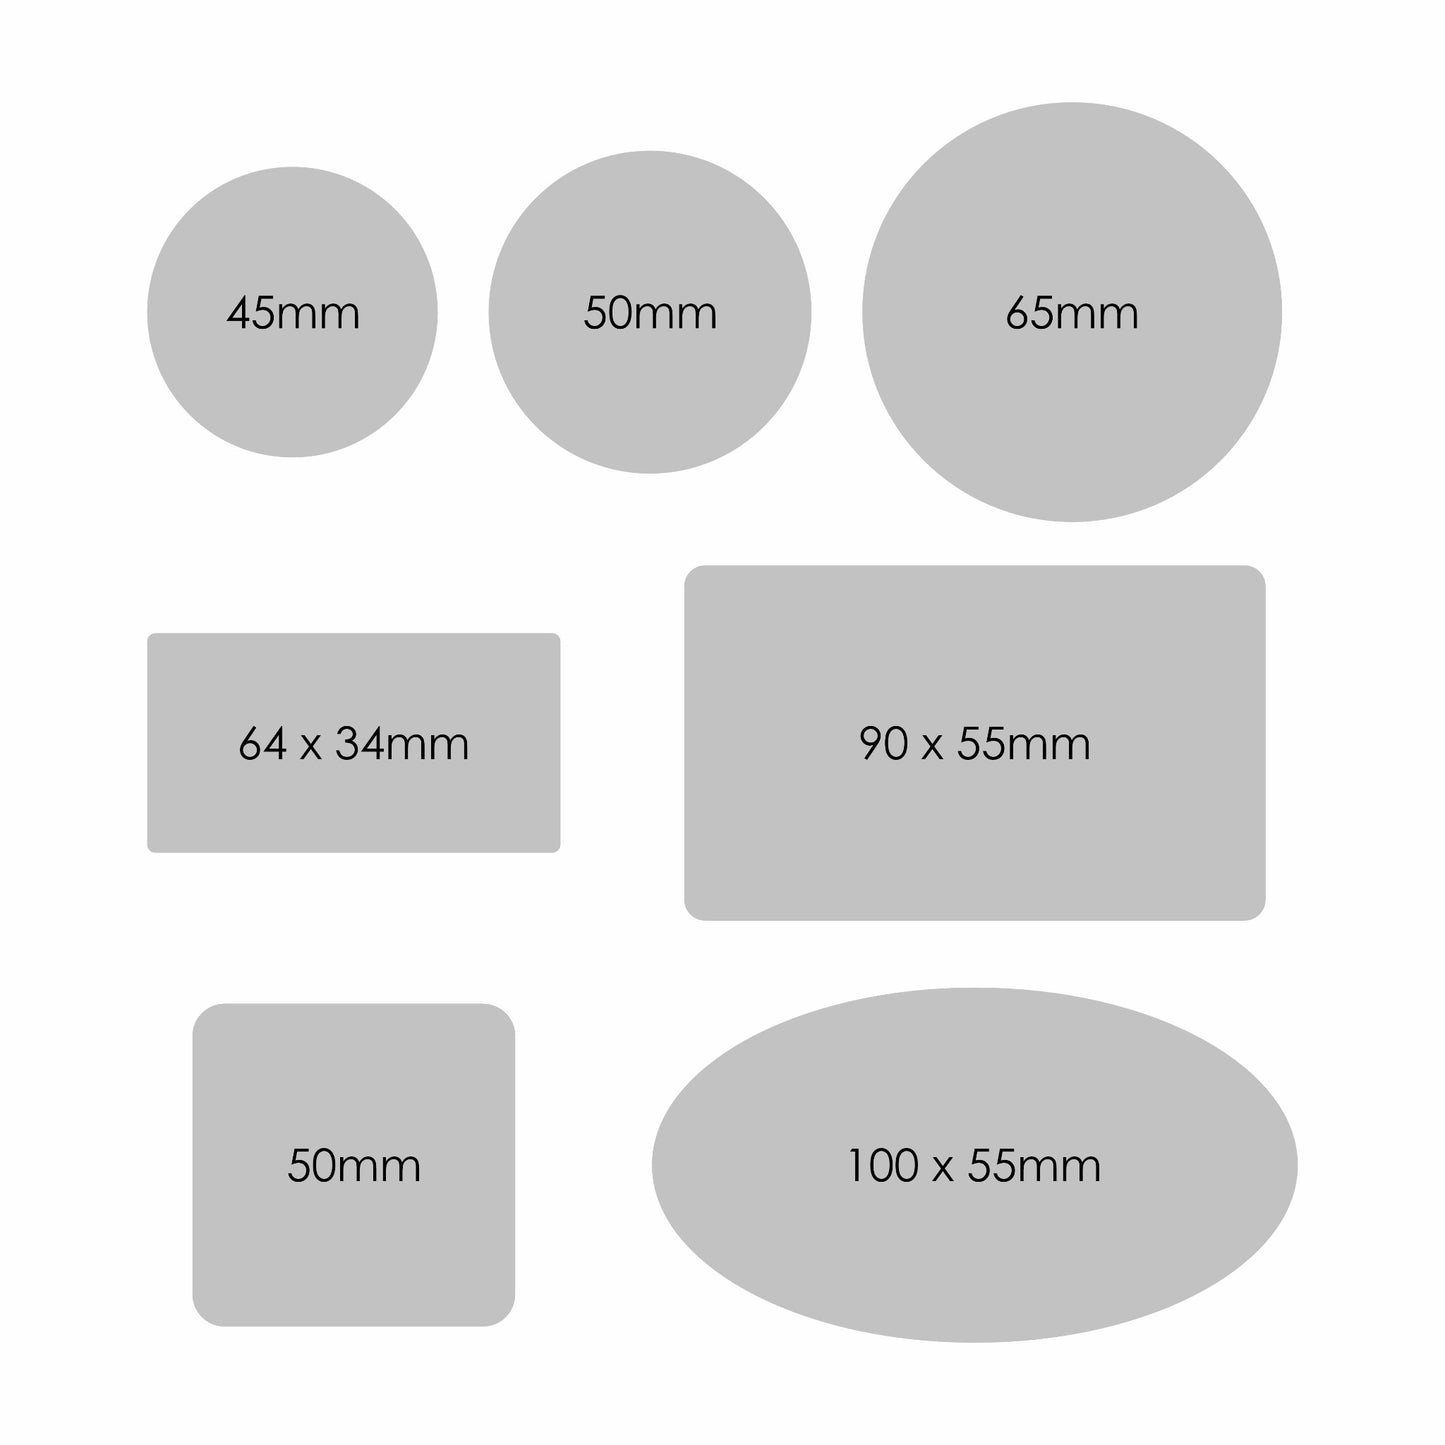 Picture of label sizes to scale